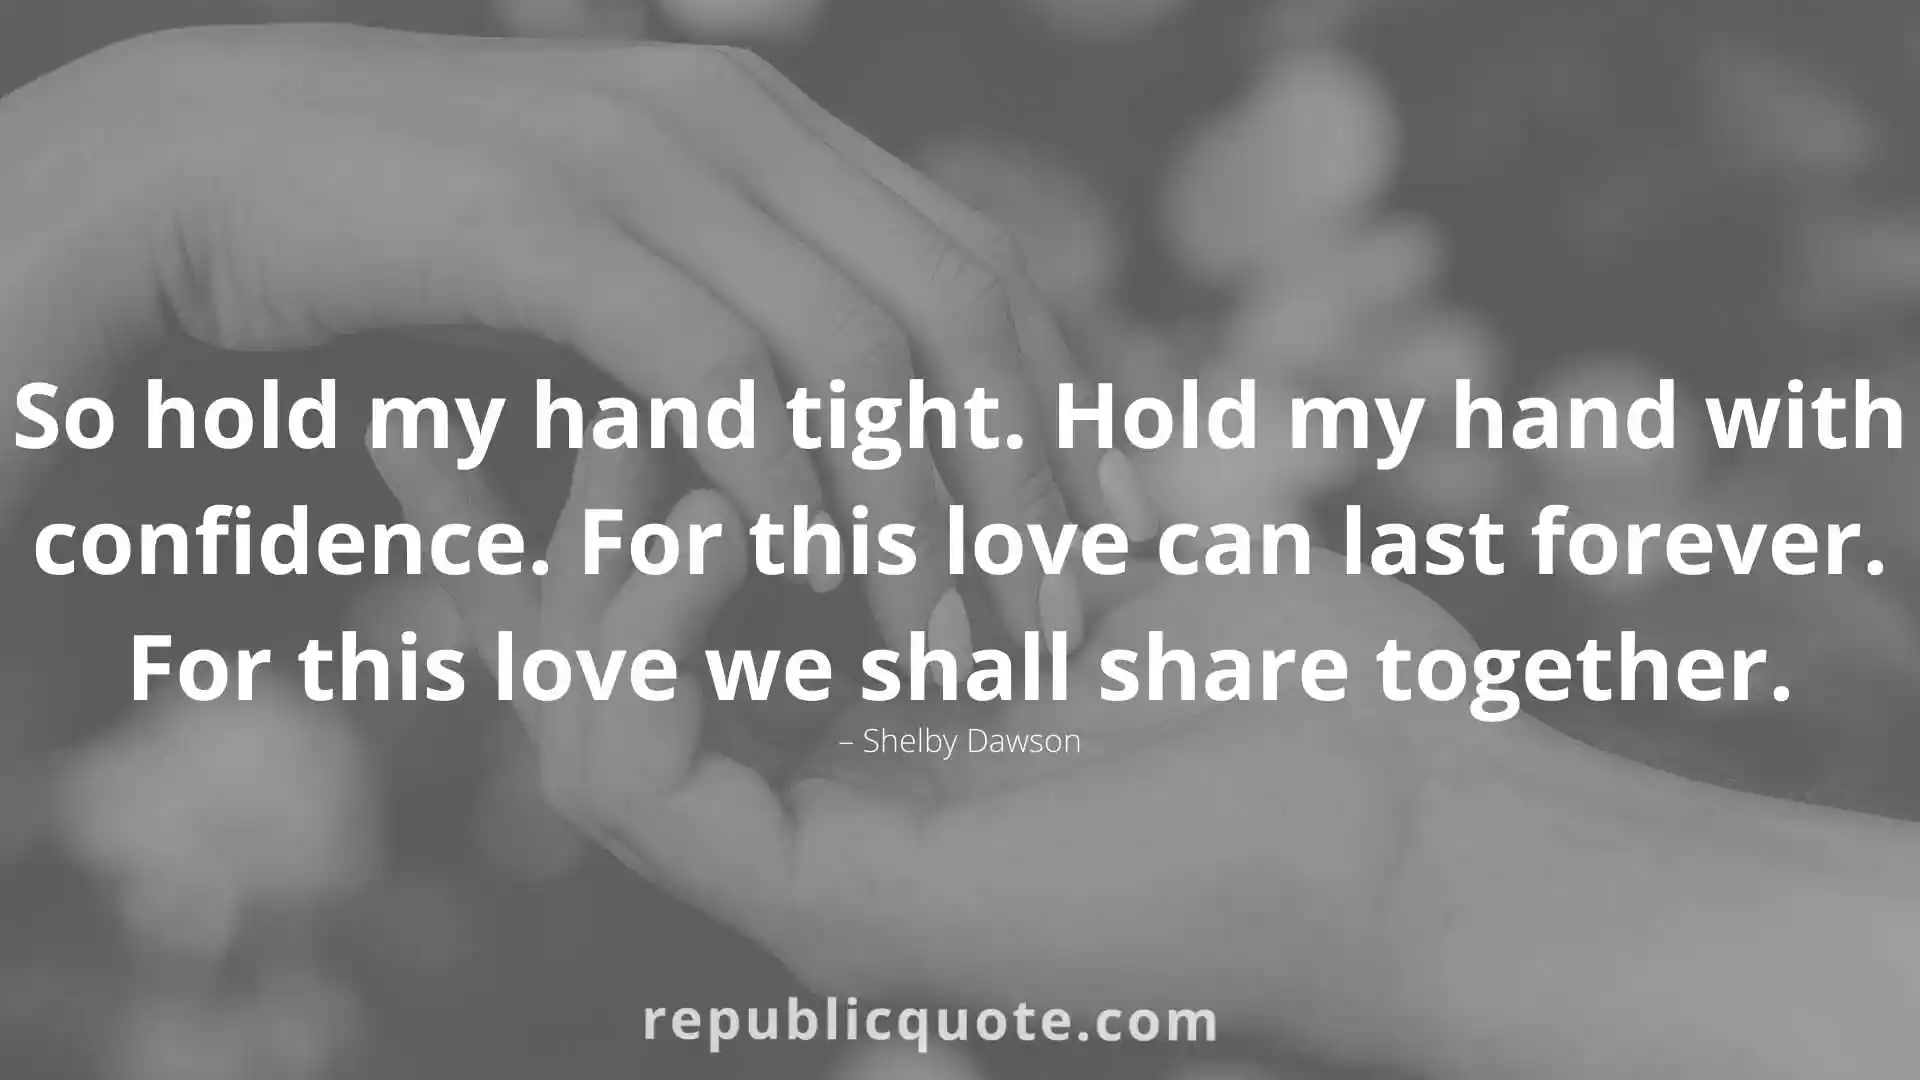 Best Holding Hands Quotes Romantic Message For Couple